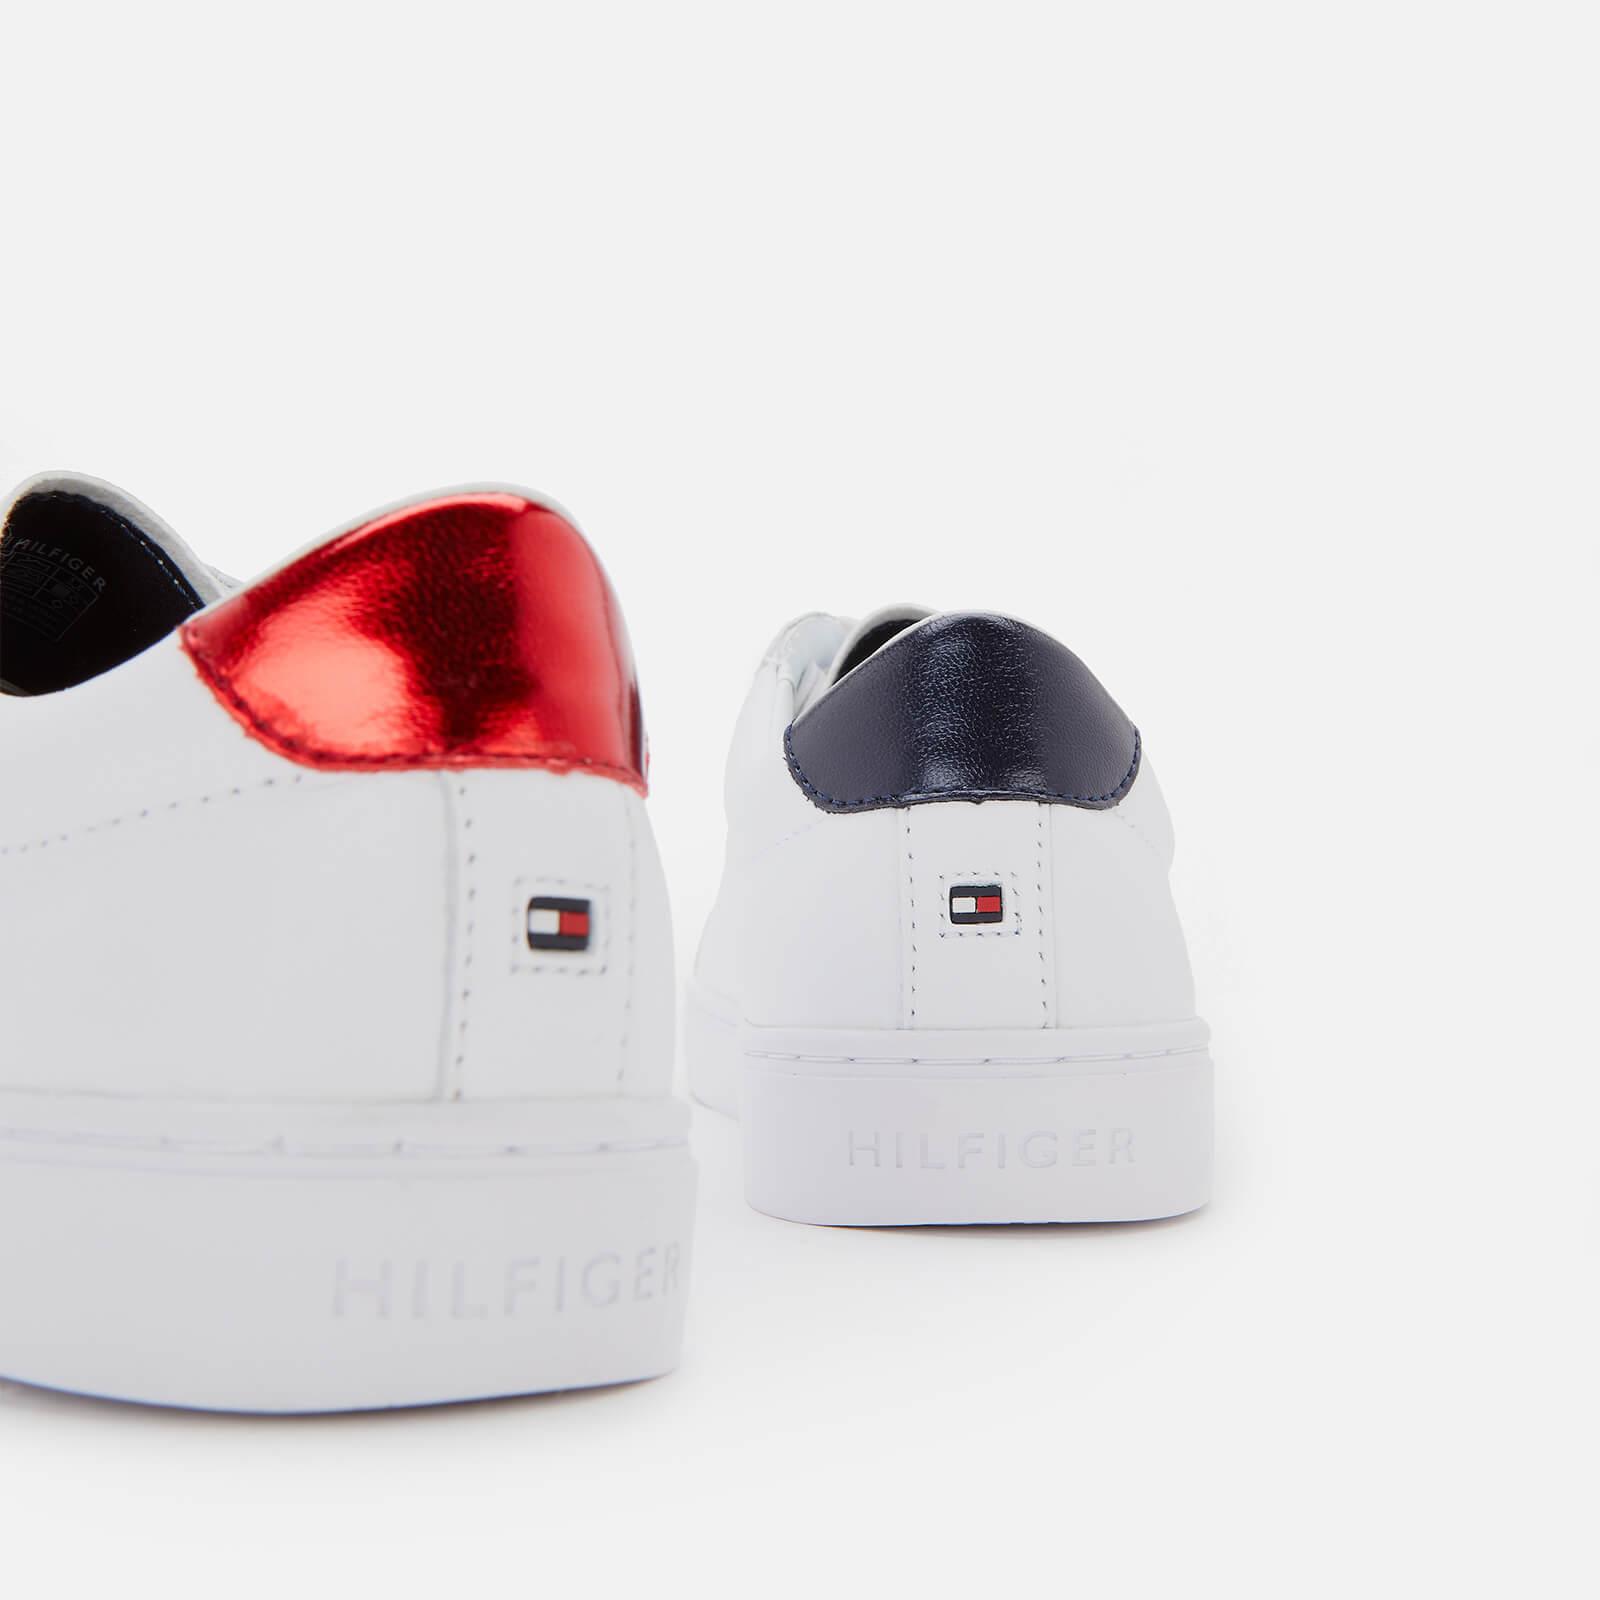 Tommy Hilfiger Venus Leather Essential Trainers in White | Lyst